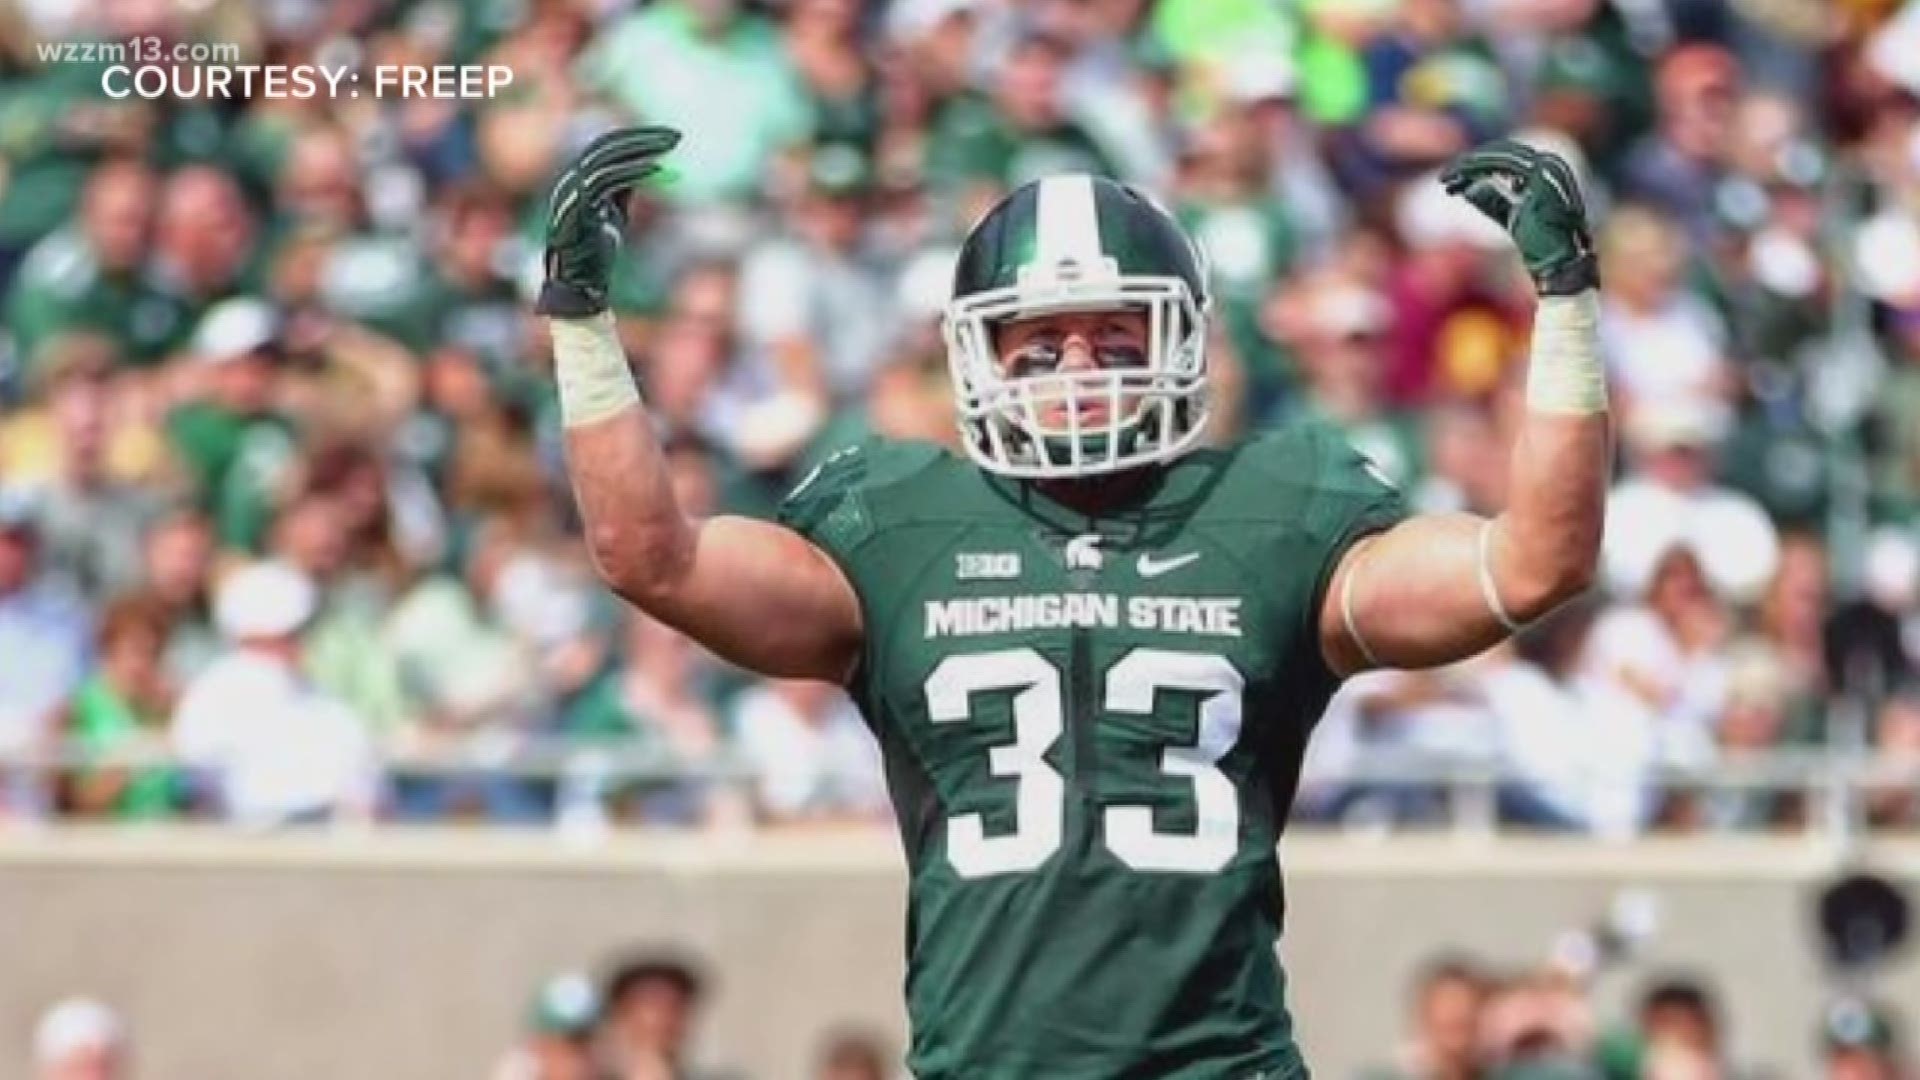 MSU player unanimously voted back on team after suspension